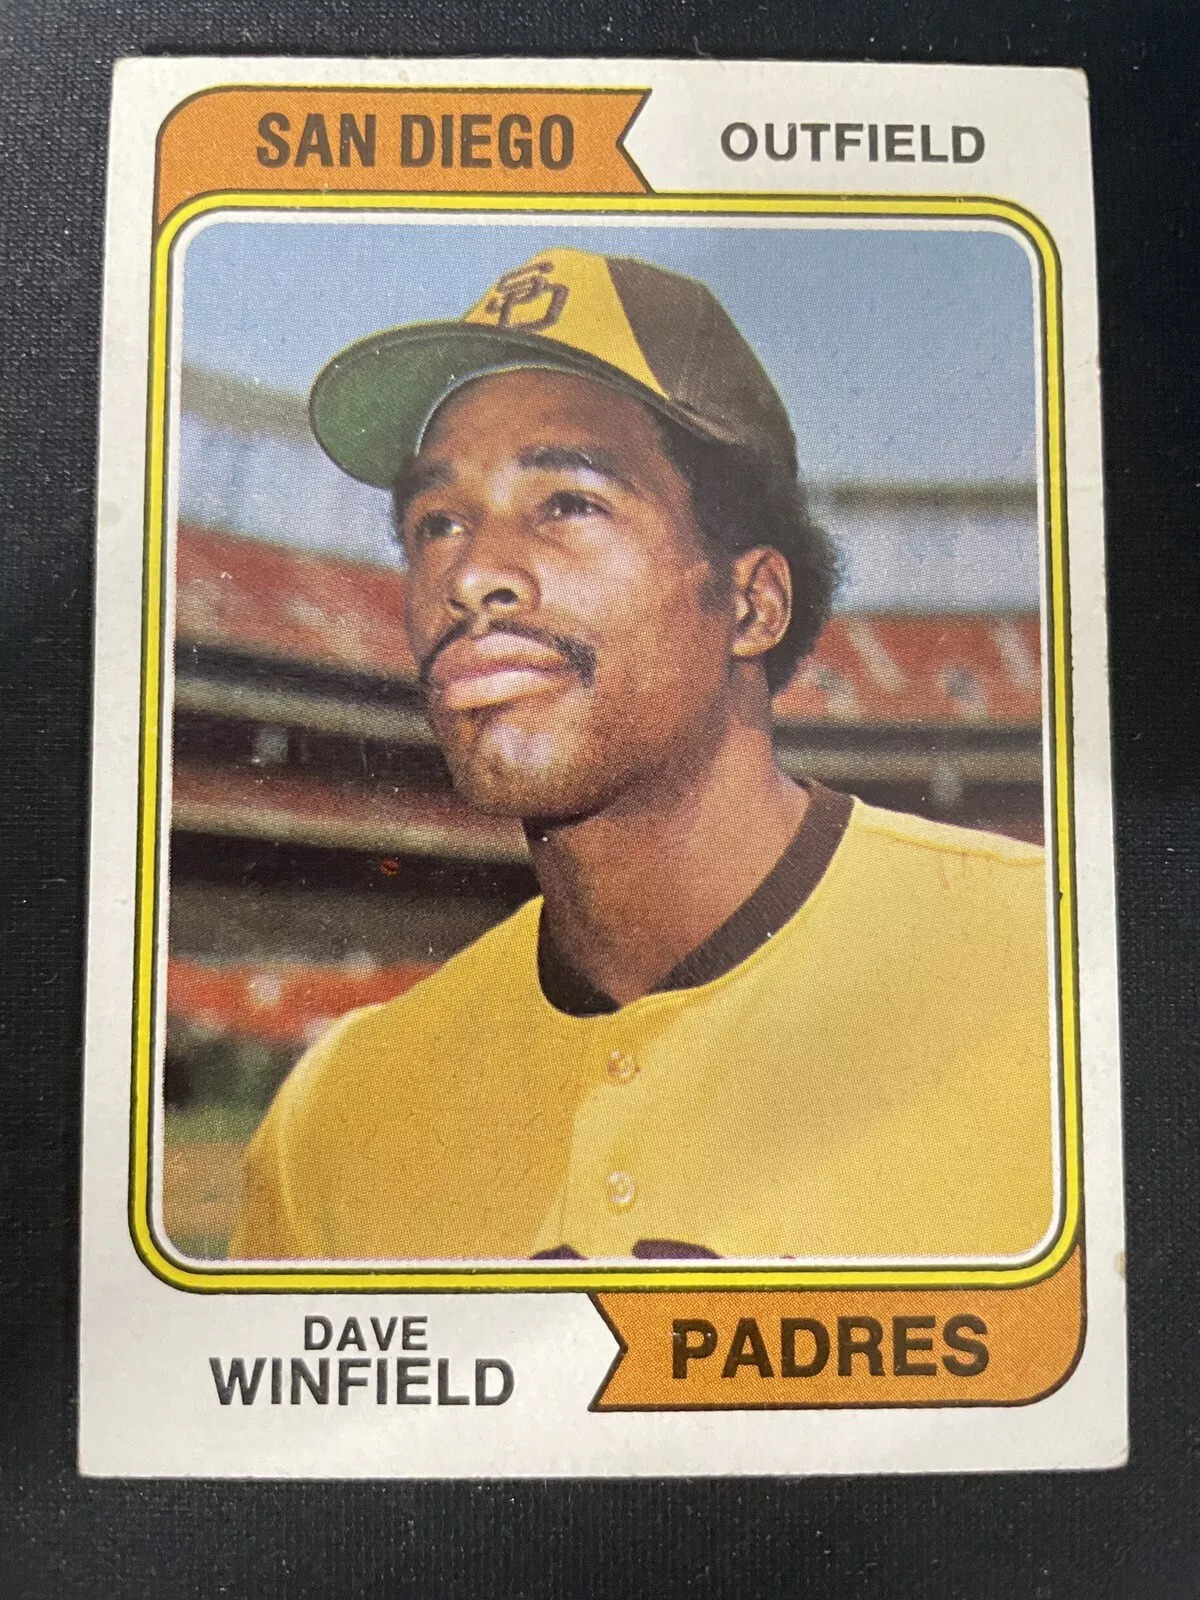 1974 Topps Dave Winfield rookie card